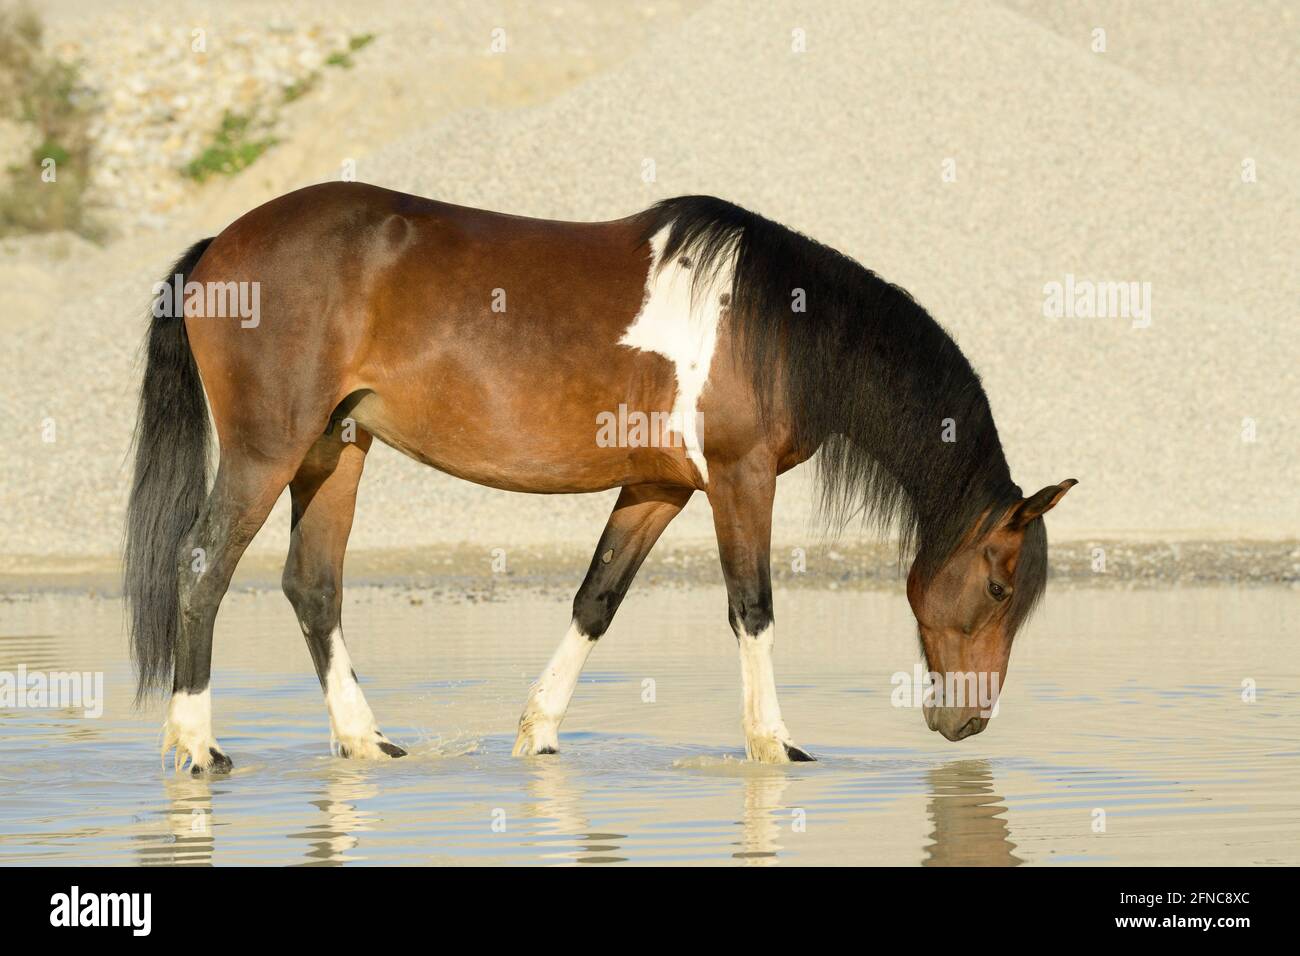 Horse in a gravel pit Stock Photo